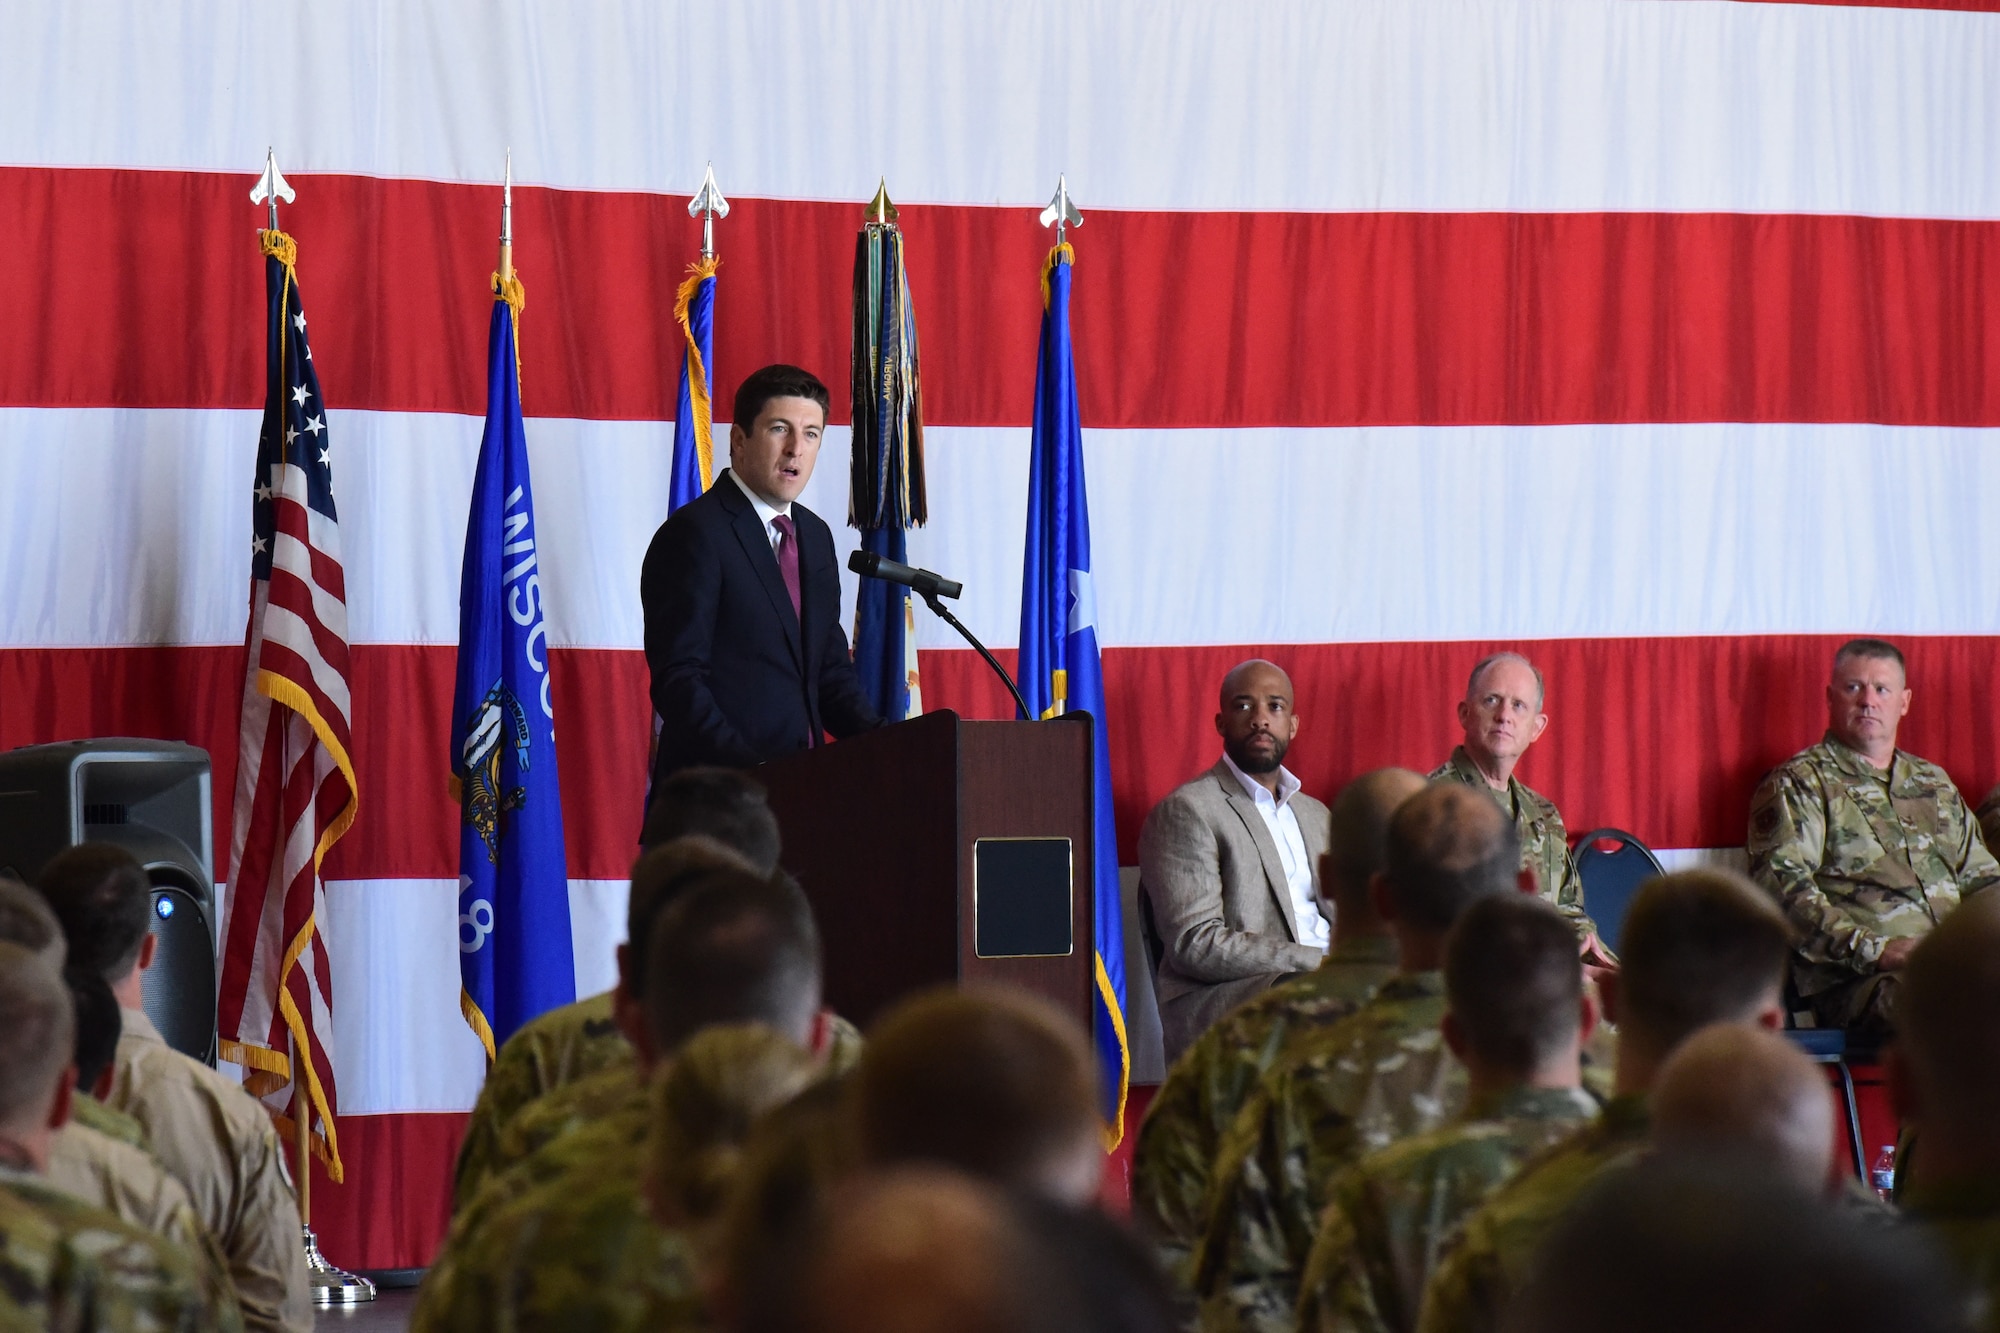 U.S. Representative Bryan Steil, 1st District of Wisconsin, speaks to deploying members of the 115th FIghter Wing at a send off ceremony at Truax Field, Madison, Wis. on July 21, 2019.  The 115th Fighter Wing deployed approximately 300 personnel and a number of aircraft to Afghanistan in support of Operation Freedom Sentinel and NATO's Resolute Support. (U.S. Air National Guard photo by Staff Sgt. Kyle Russell)